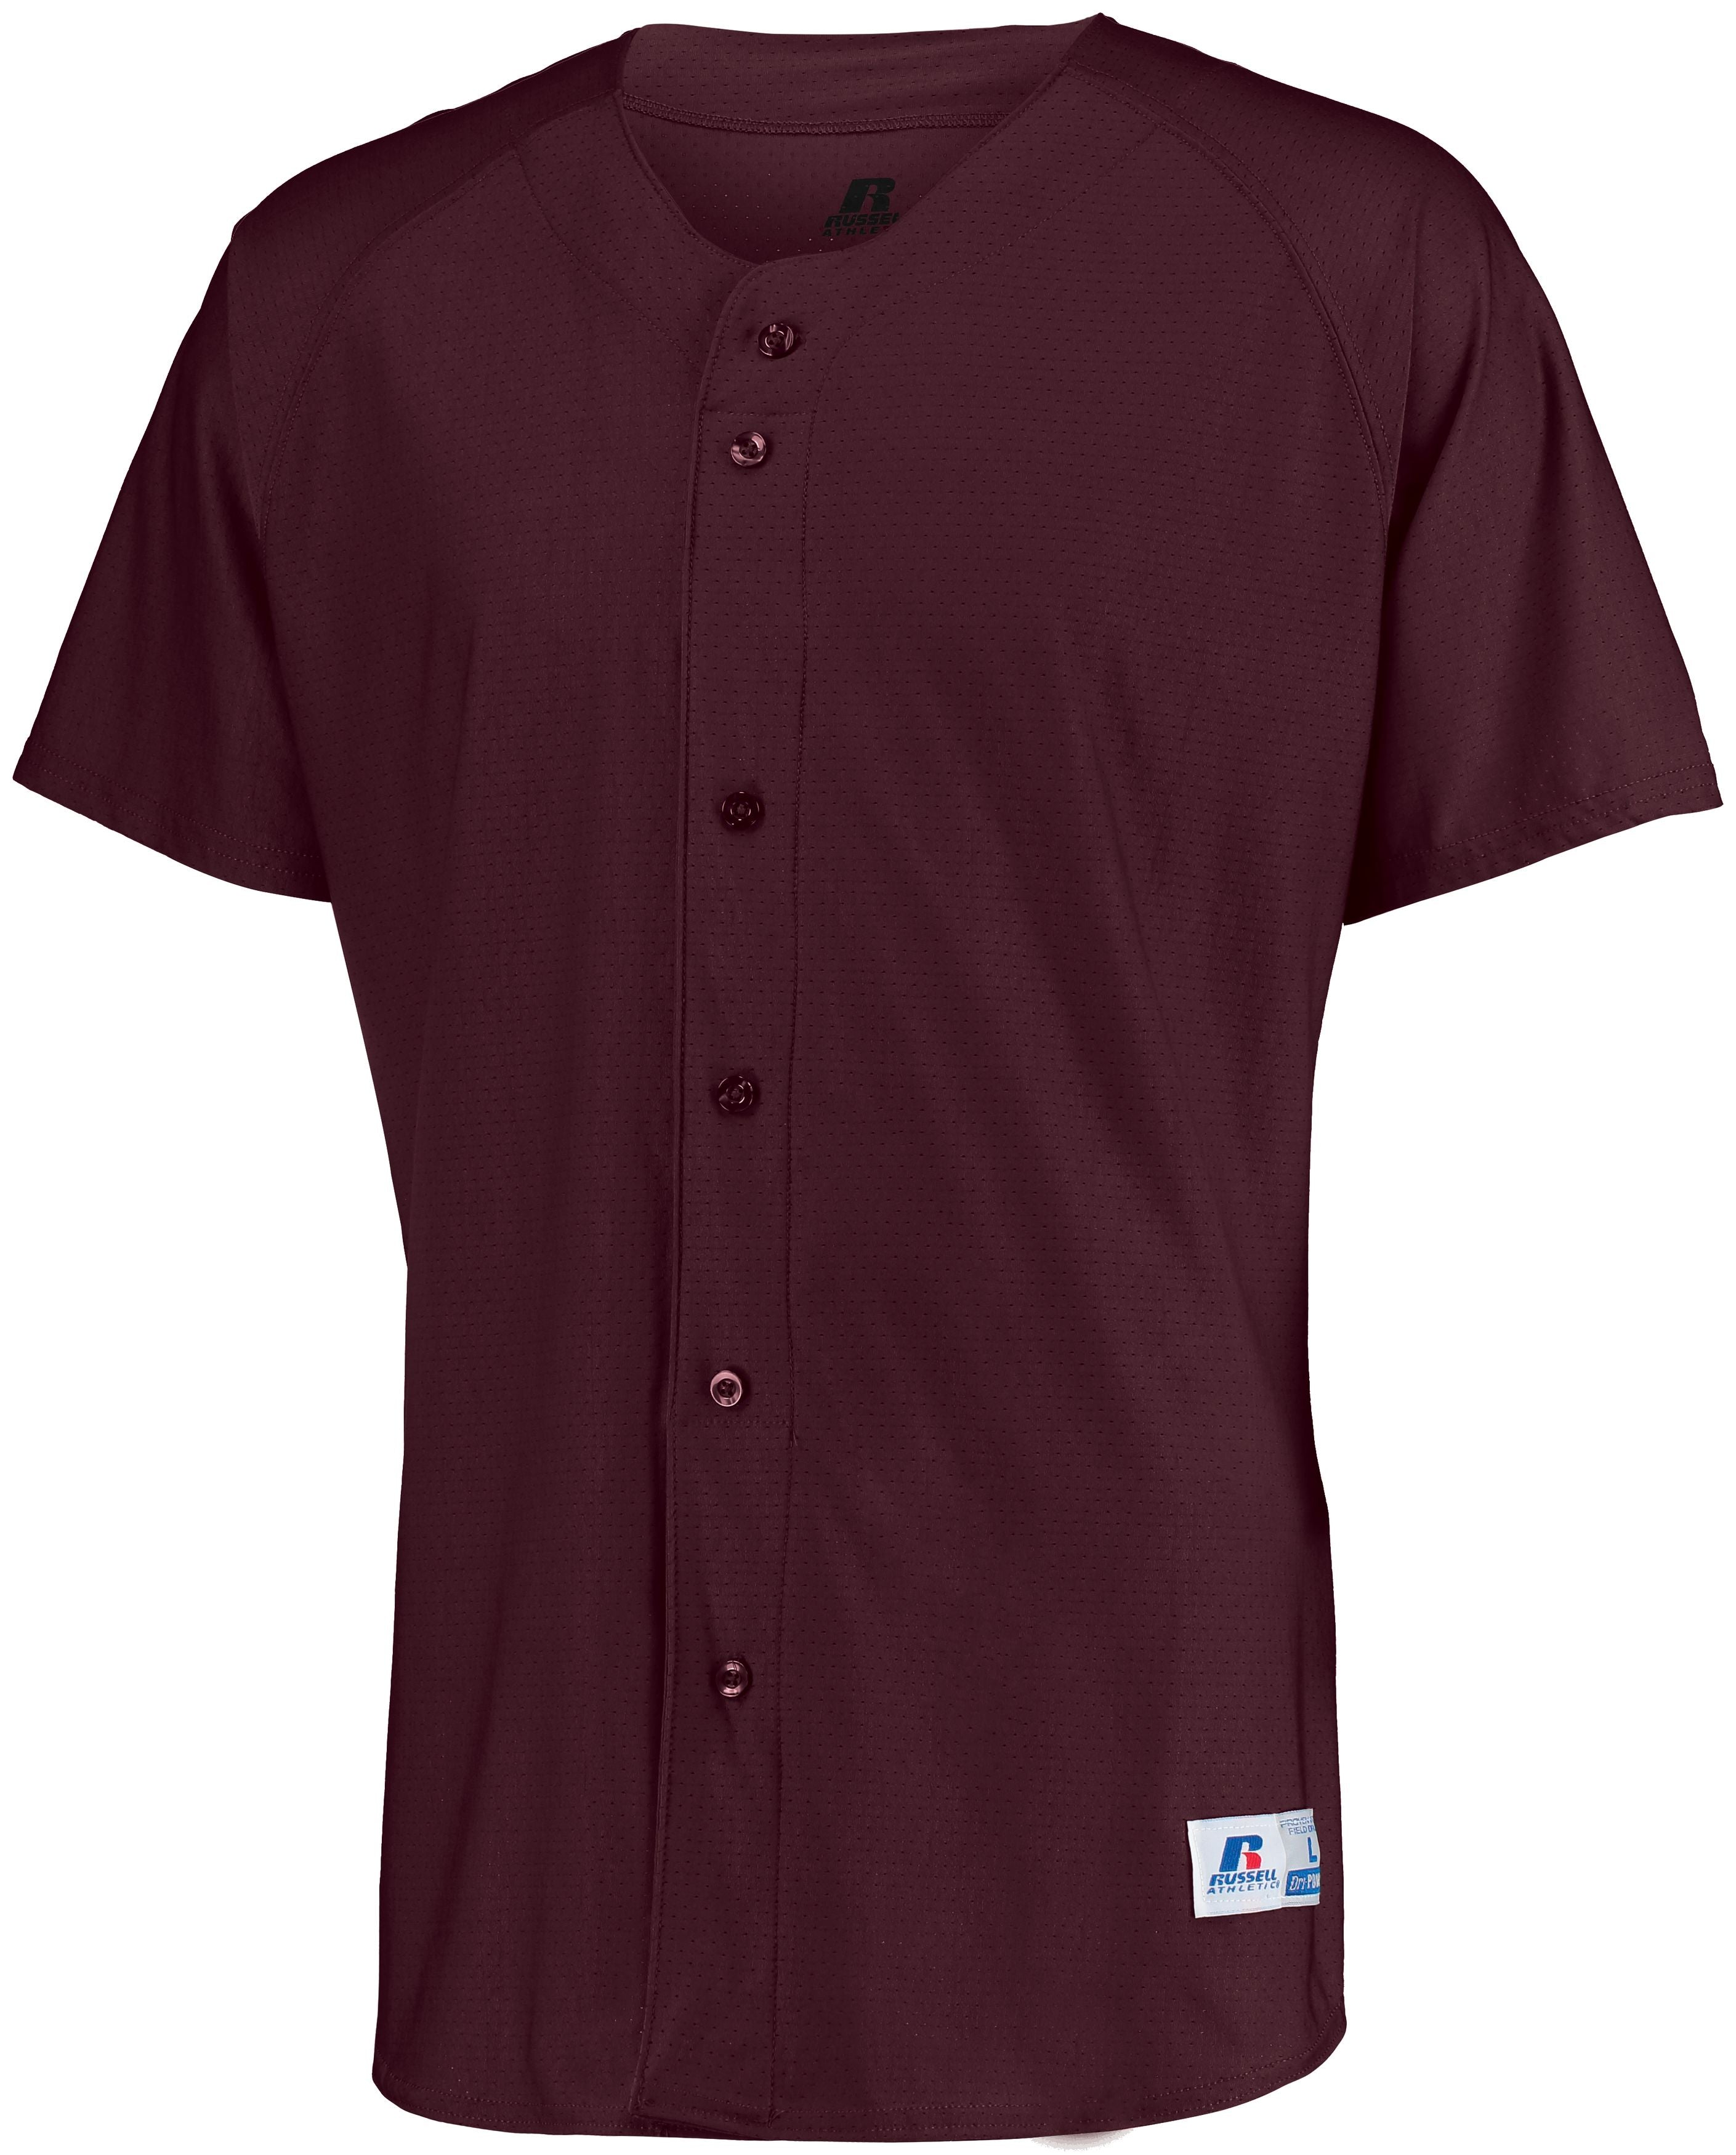 Russell Athletic Raglan Sleeve Button Front Jersey in Maroon  -Part of the Adult, Adult-Jersey, Baseball, Russell-Athletic-Products, Shirts, All-Sports, All-Sports-1 product lines at KanaleyCreations.com